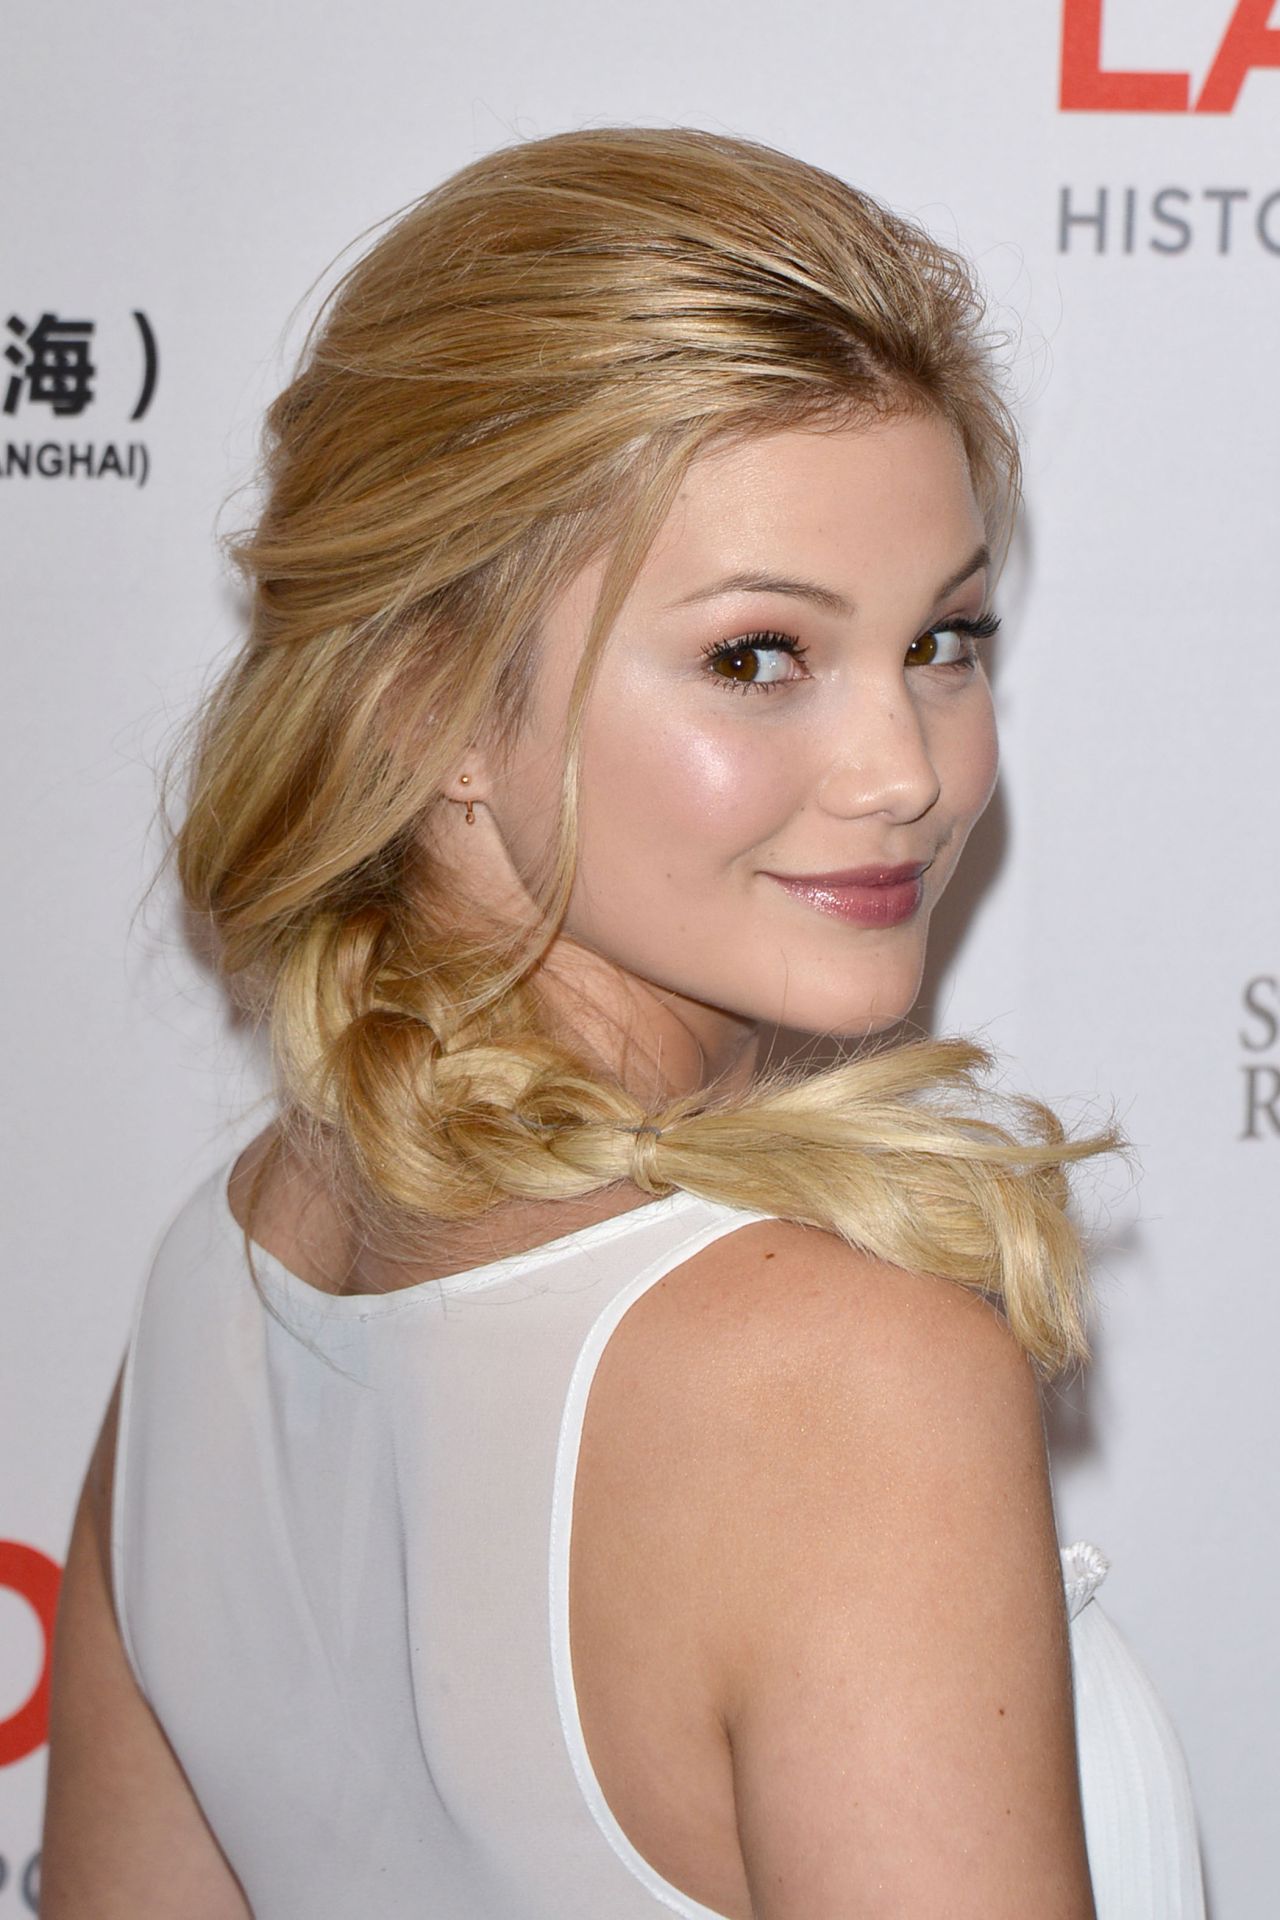 Olivia Holt - LA Art Show 2015 Opening Night Premiere Party.